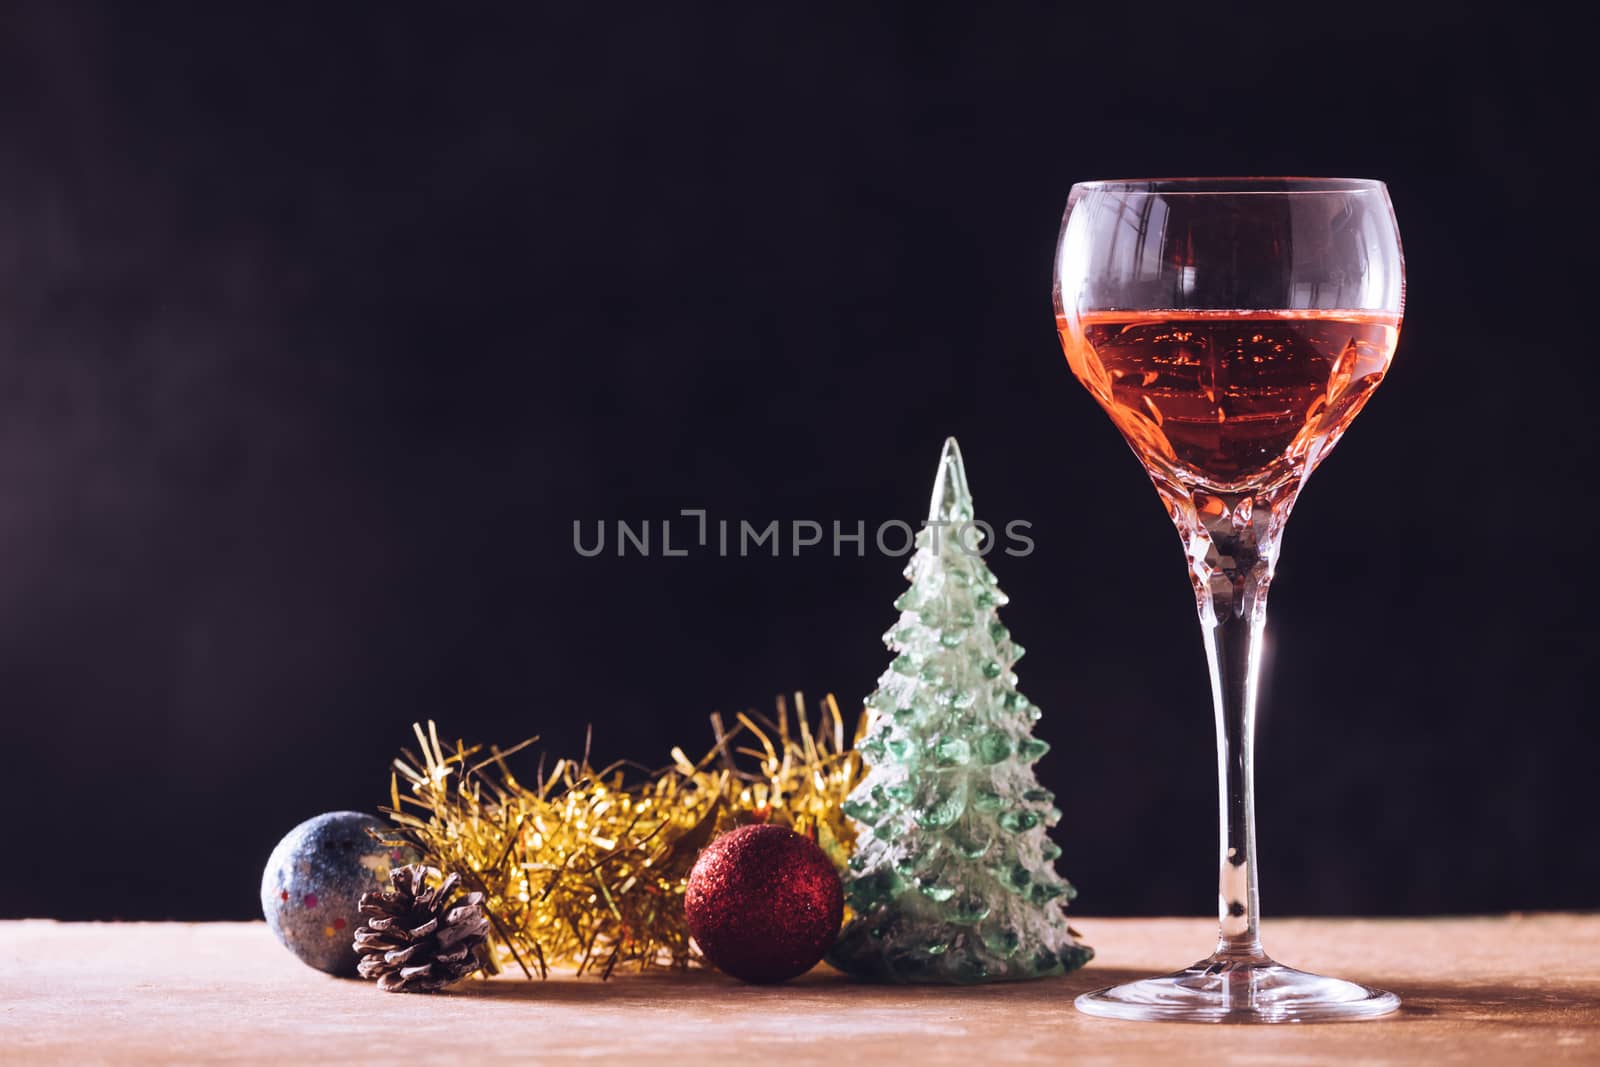 Glass of wine with Christmas decorations on the wooden table, black background, free space for text